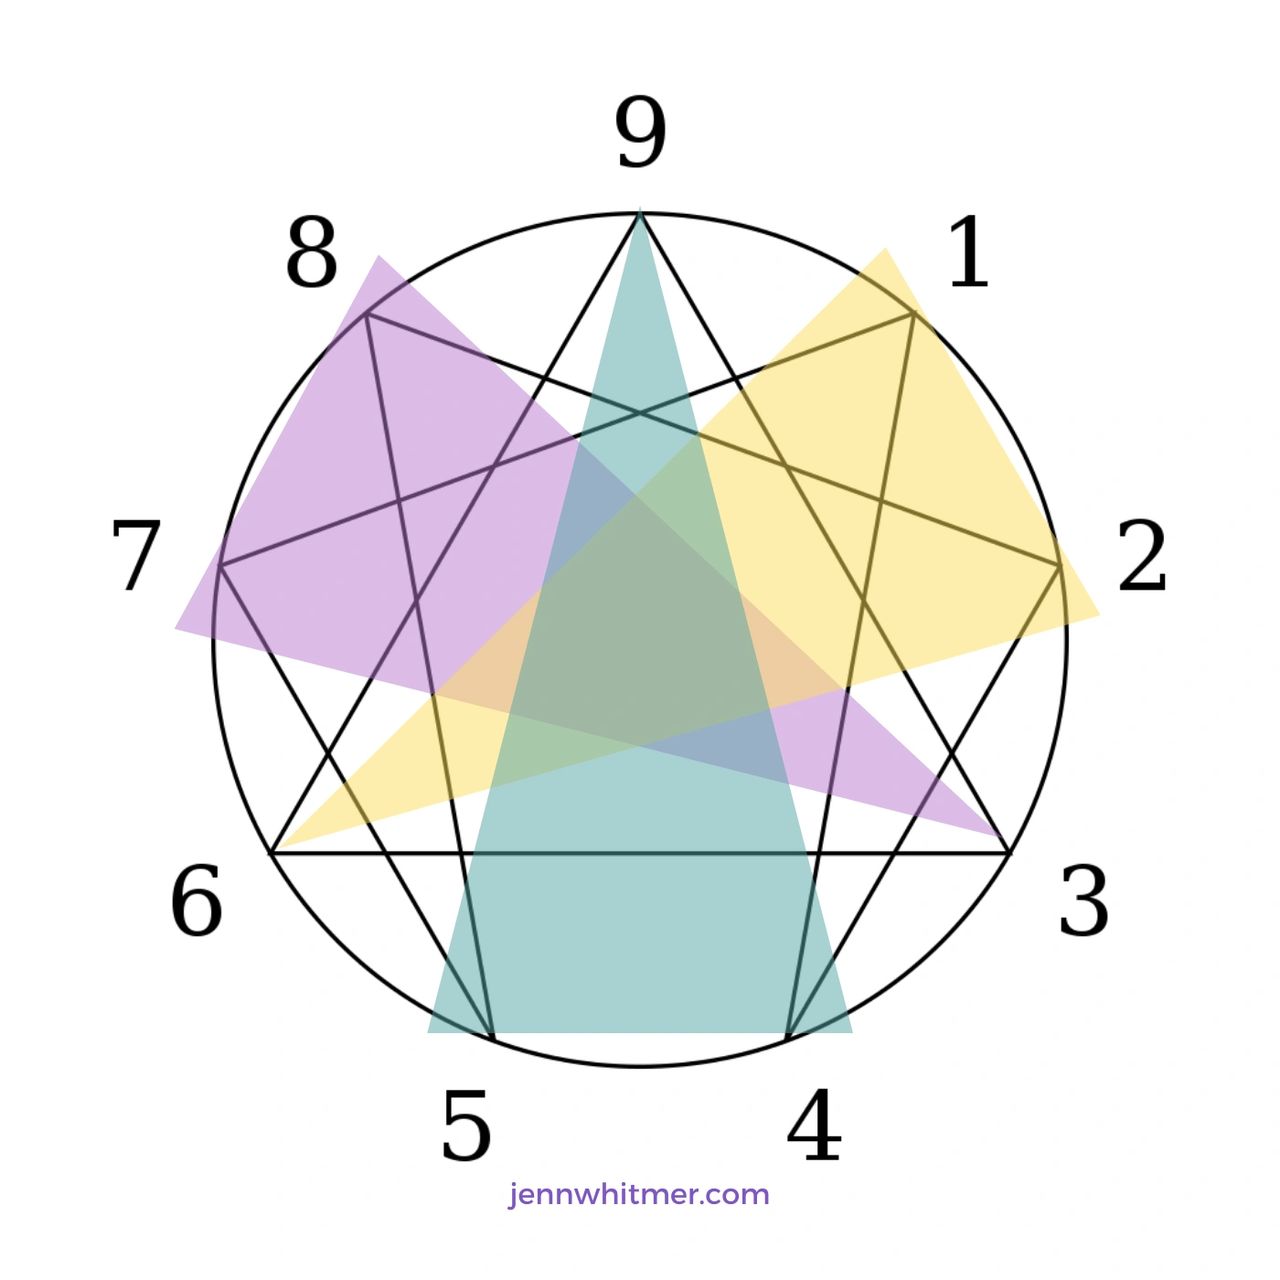 Enneagram Stances: Assertive, Earning, Withdrawing symbol Conflict Resolution Coach